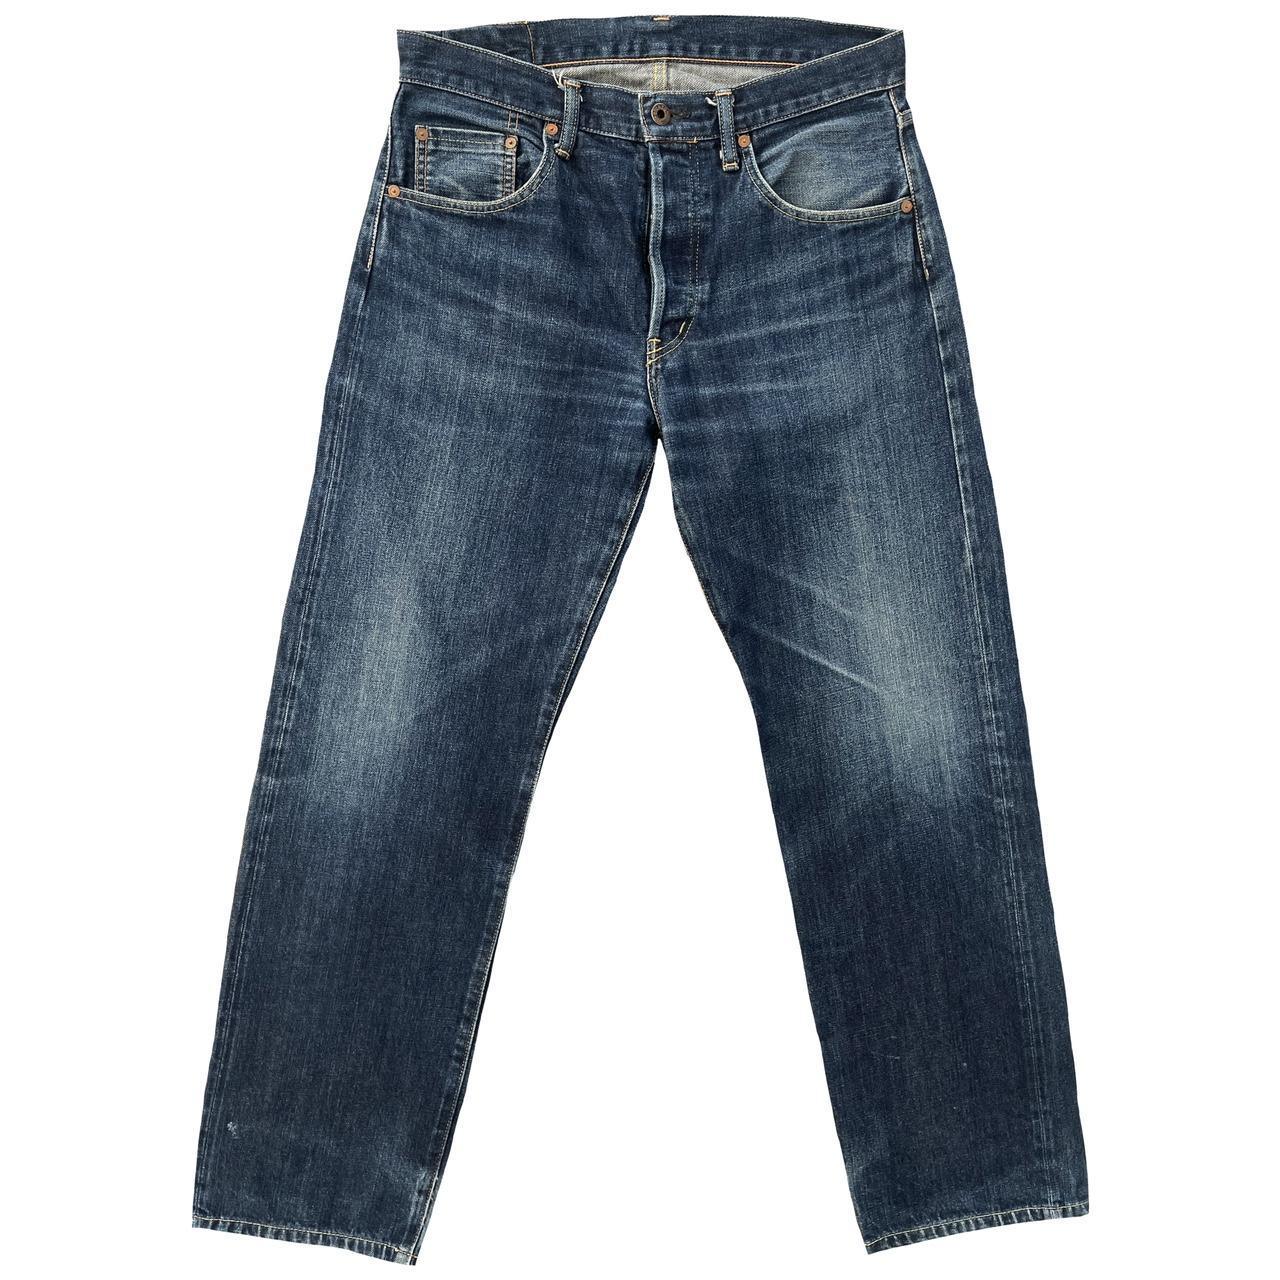 Tedman's Airbrushed Selvedge Jeans - Known Source